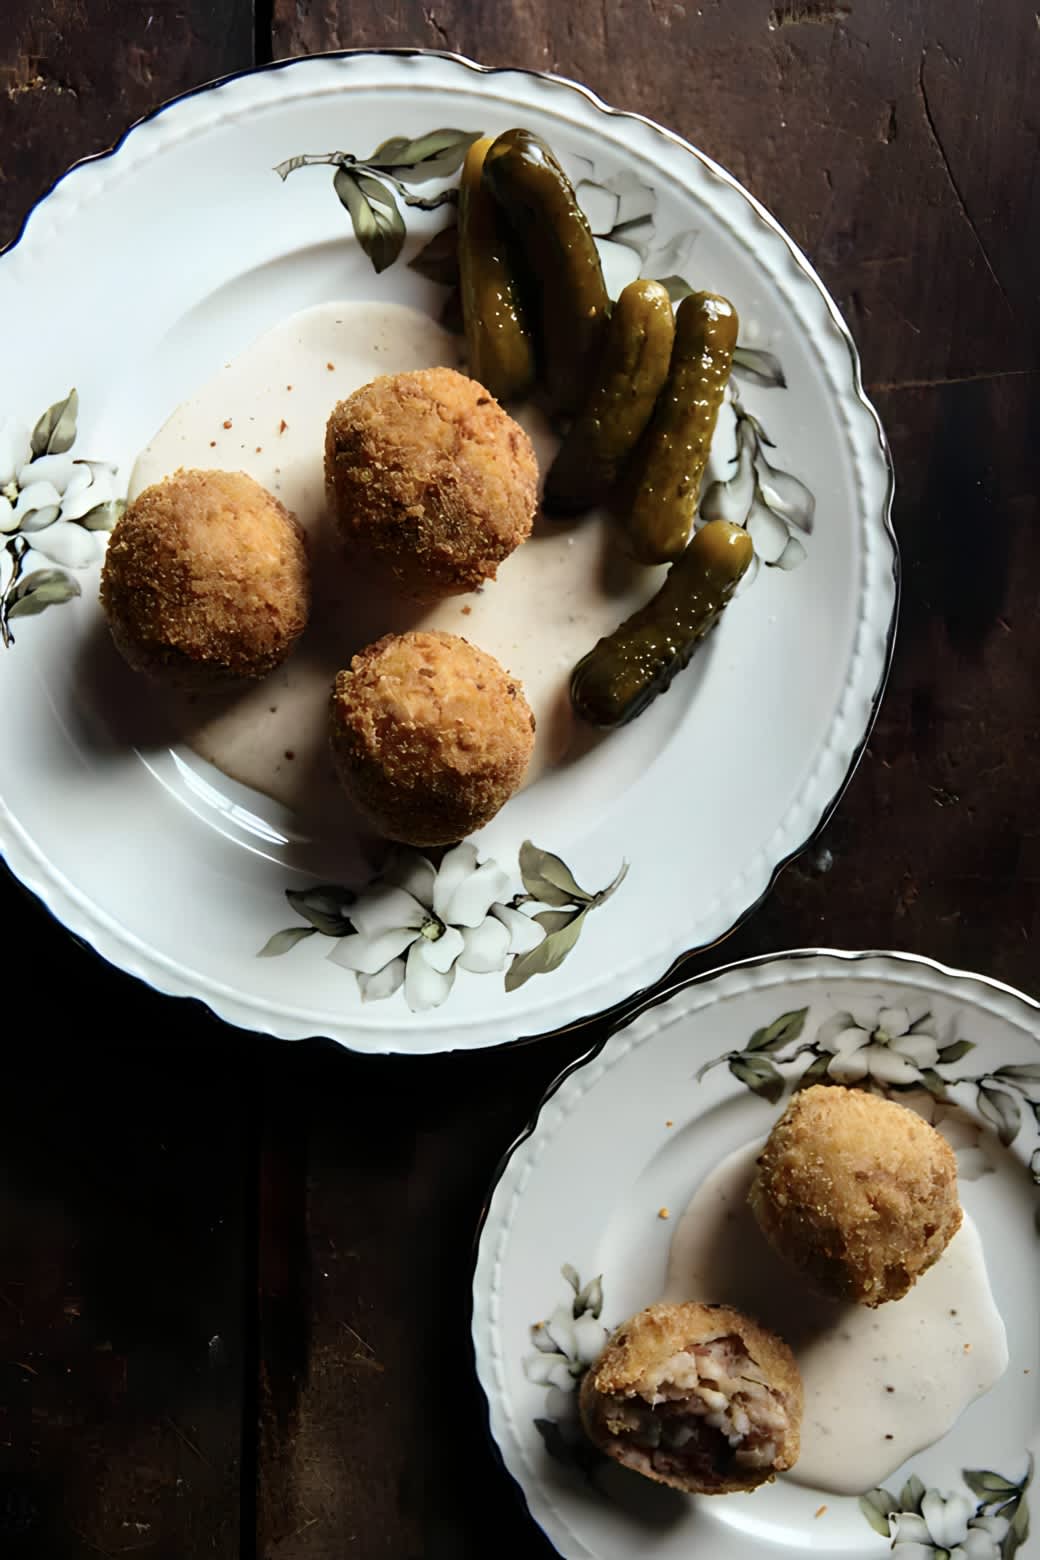 Boudin balls on a plate with sauce.